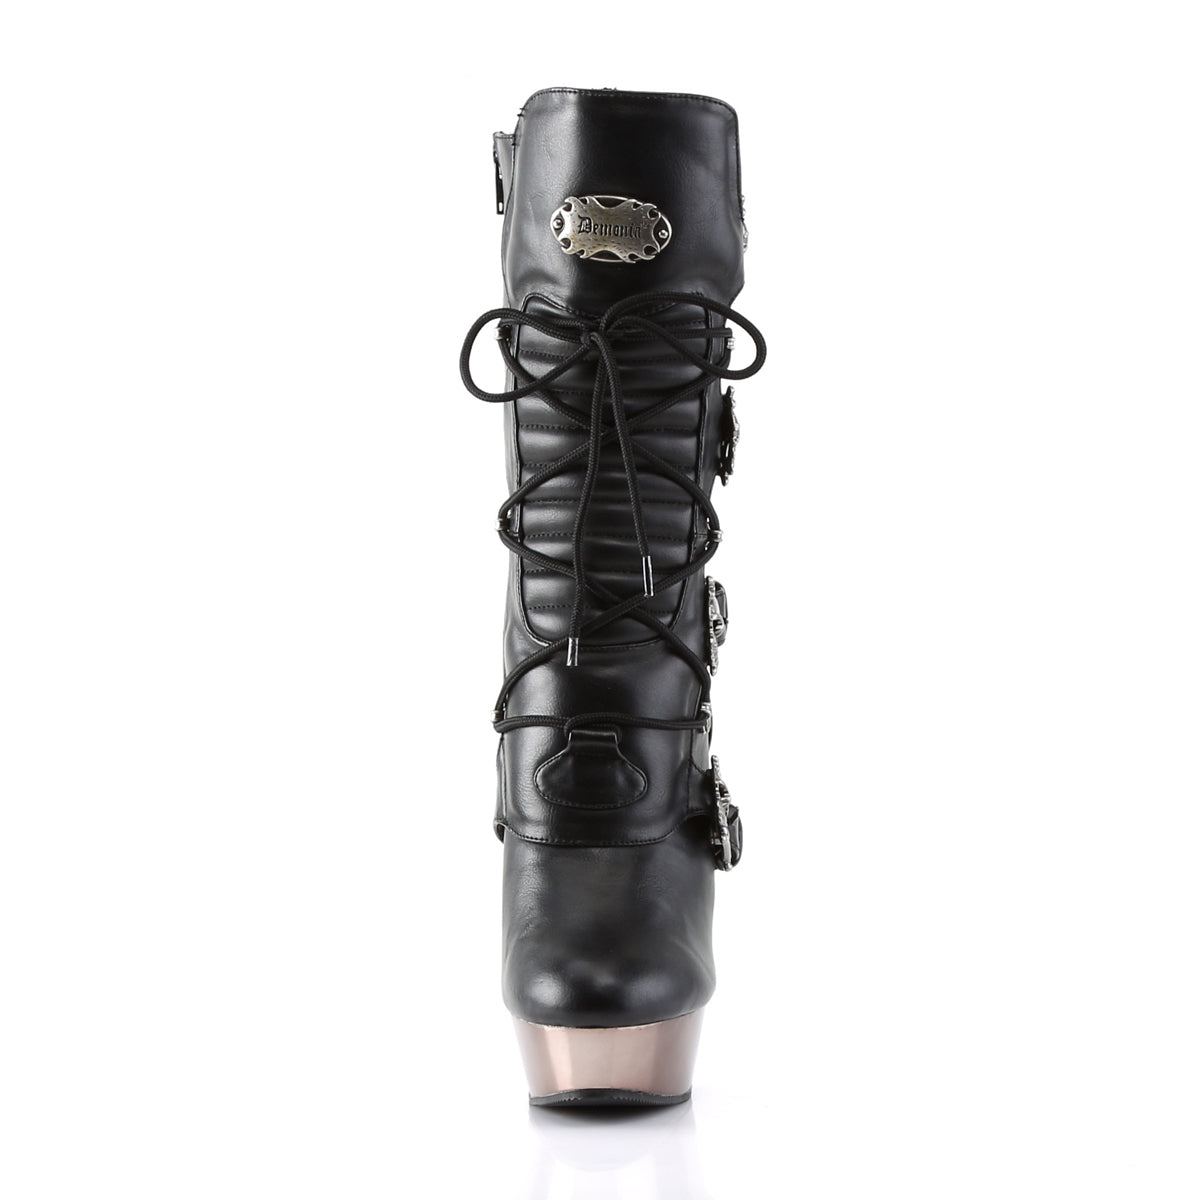 Demonia MUERTO-1026 | Black Pewter V. Leather Mid-Calf Boots